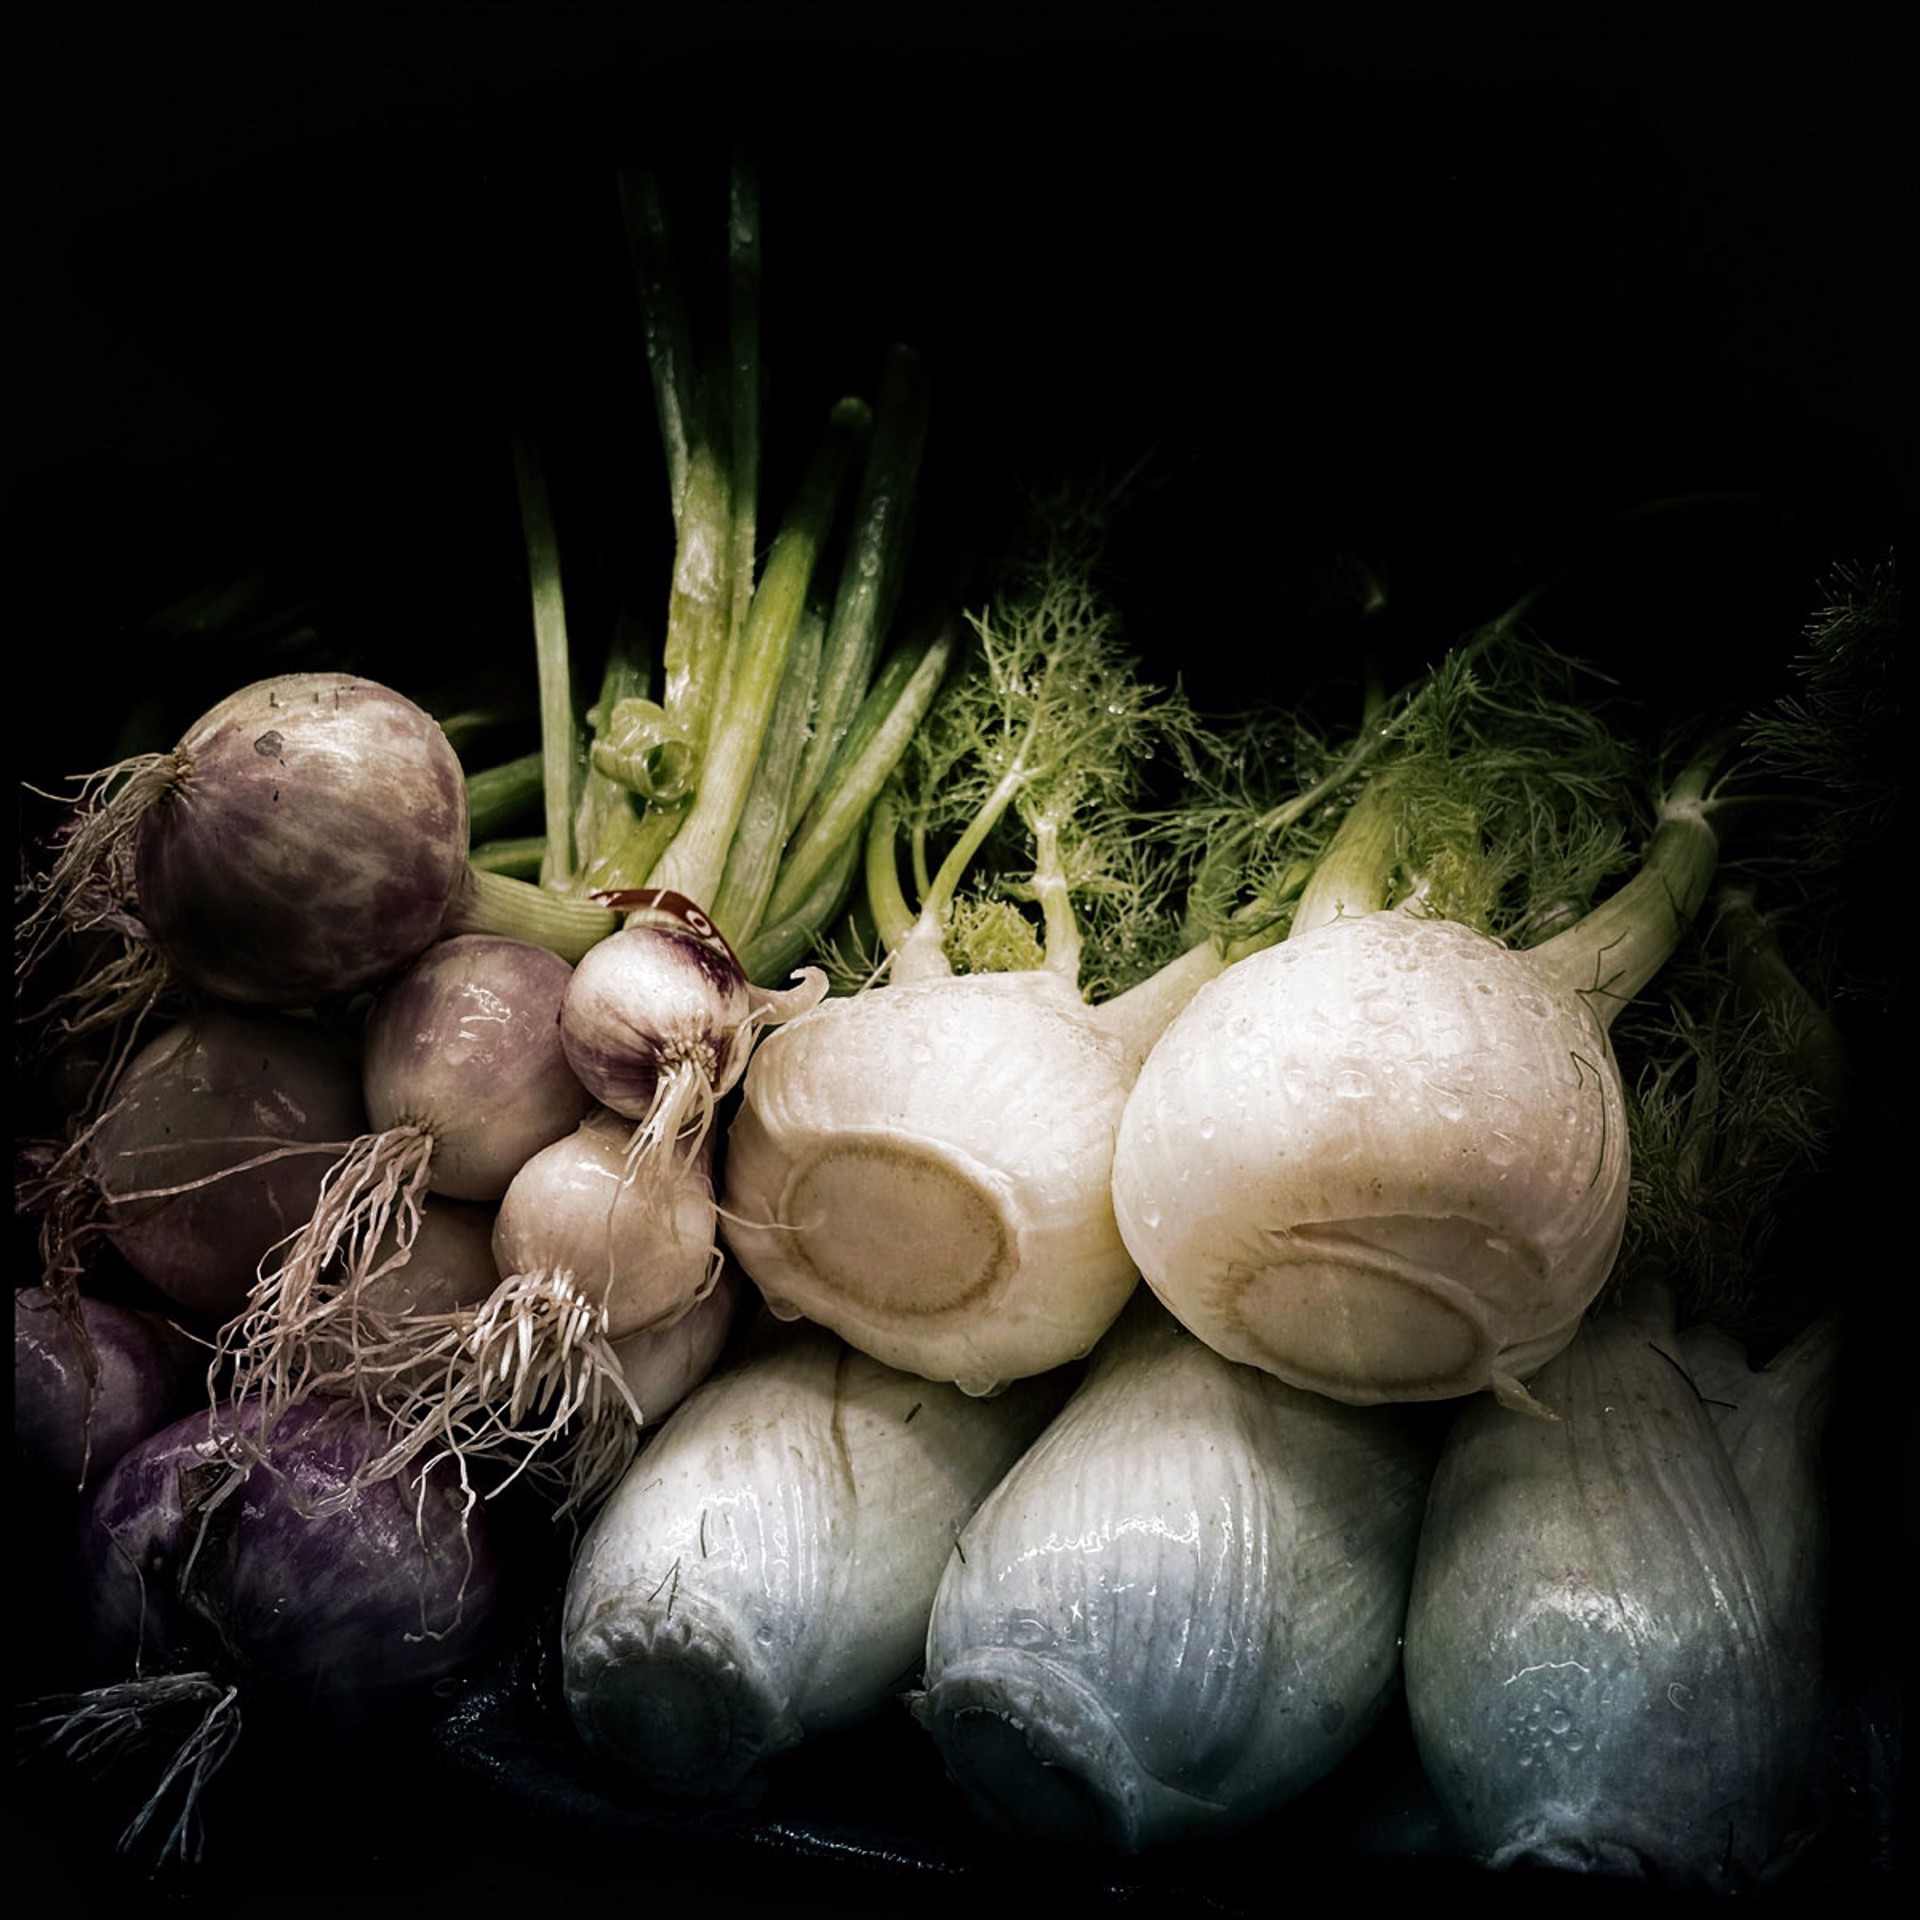 Fennel and Onions by Arlene Stanger